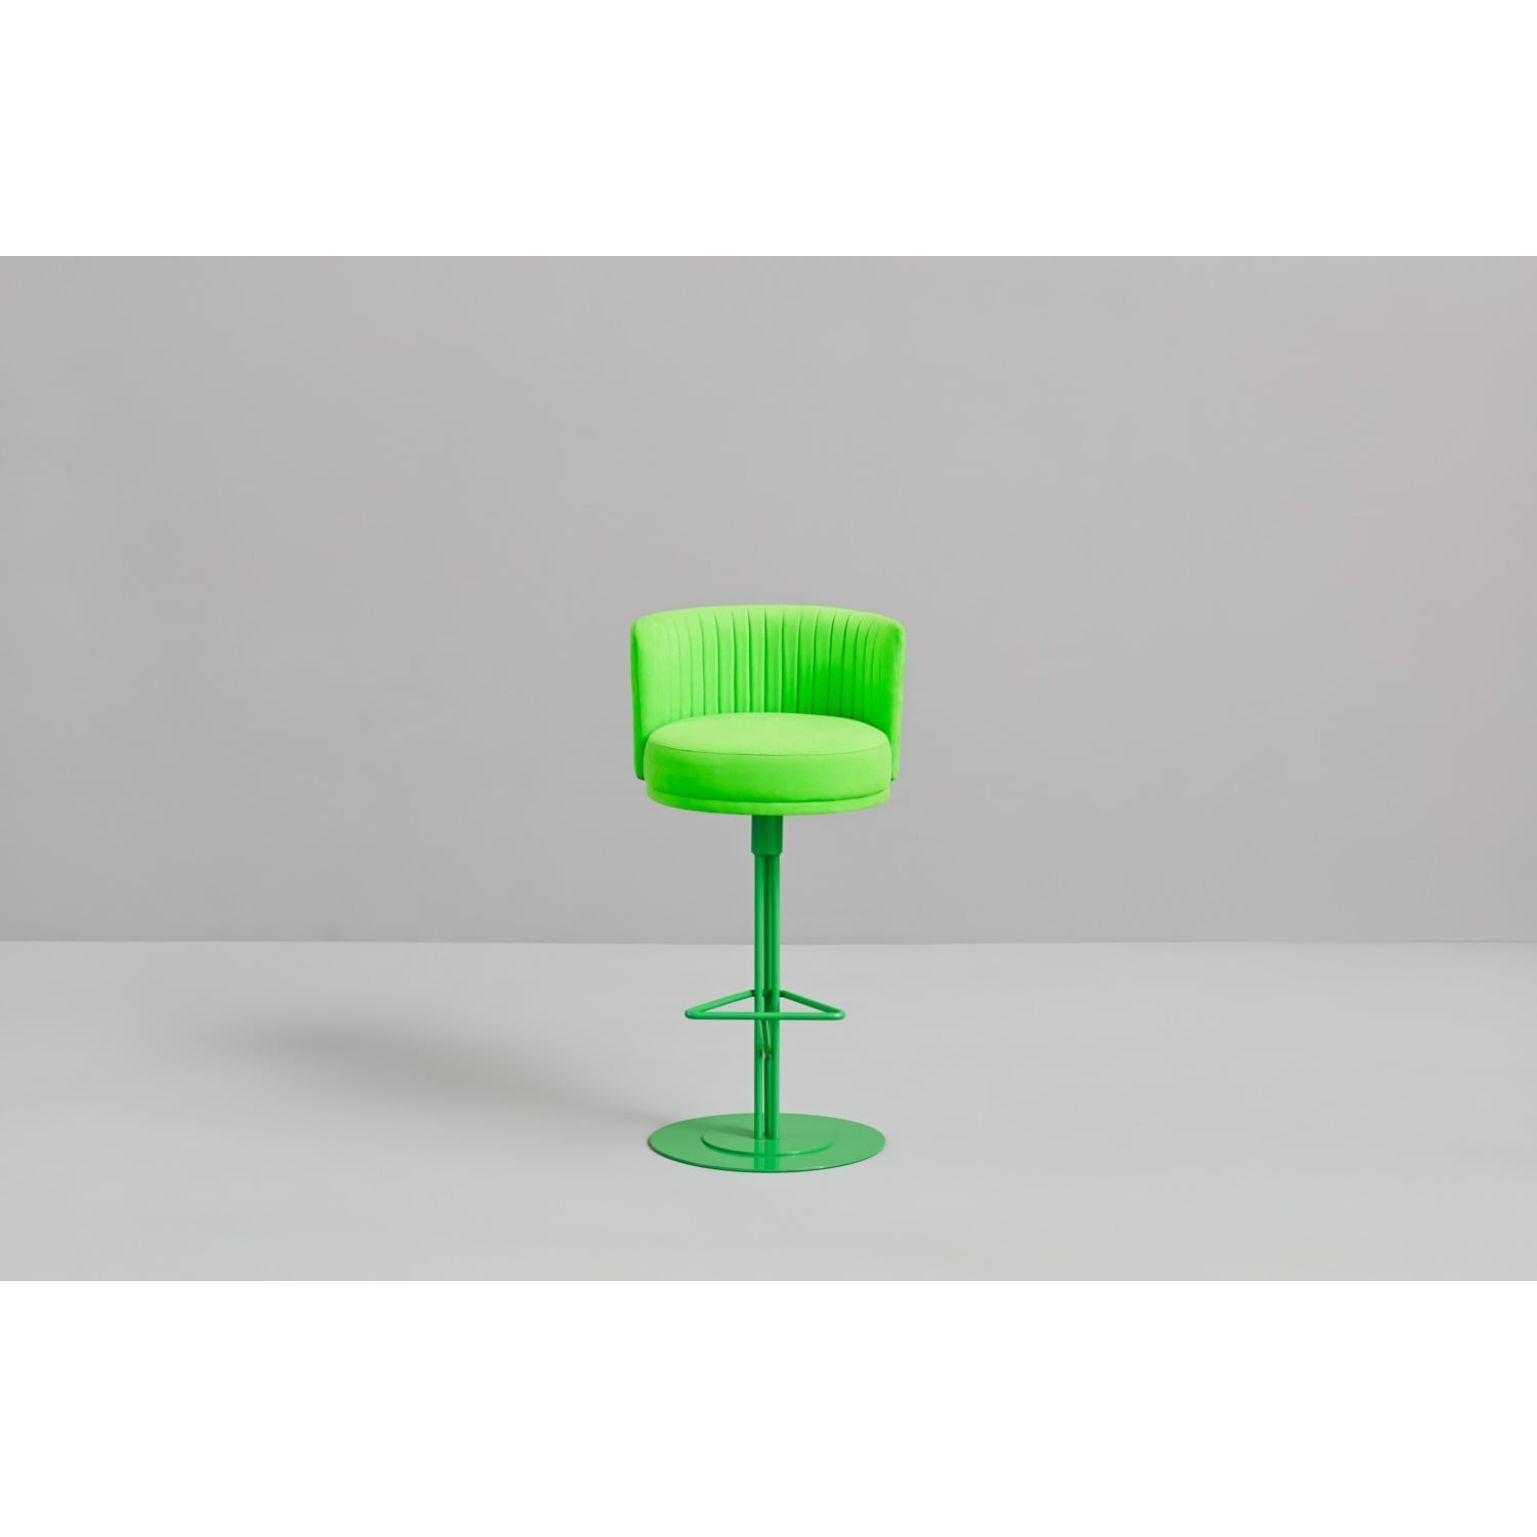 Pair of green Athens stools by Pepe Albargues
Dimensions: W 52, D 55, H 101, seat 80
Materials: Iron structure and seat particles board
Foam CMHR (high resilience and flame retardant) for all our cushion filling systems
Painted iron